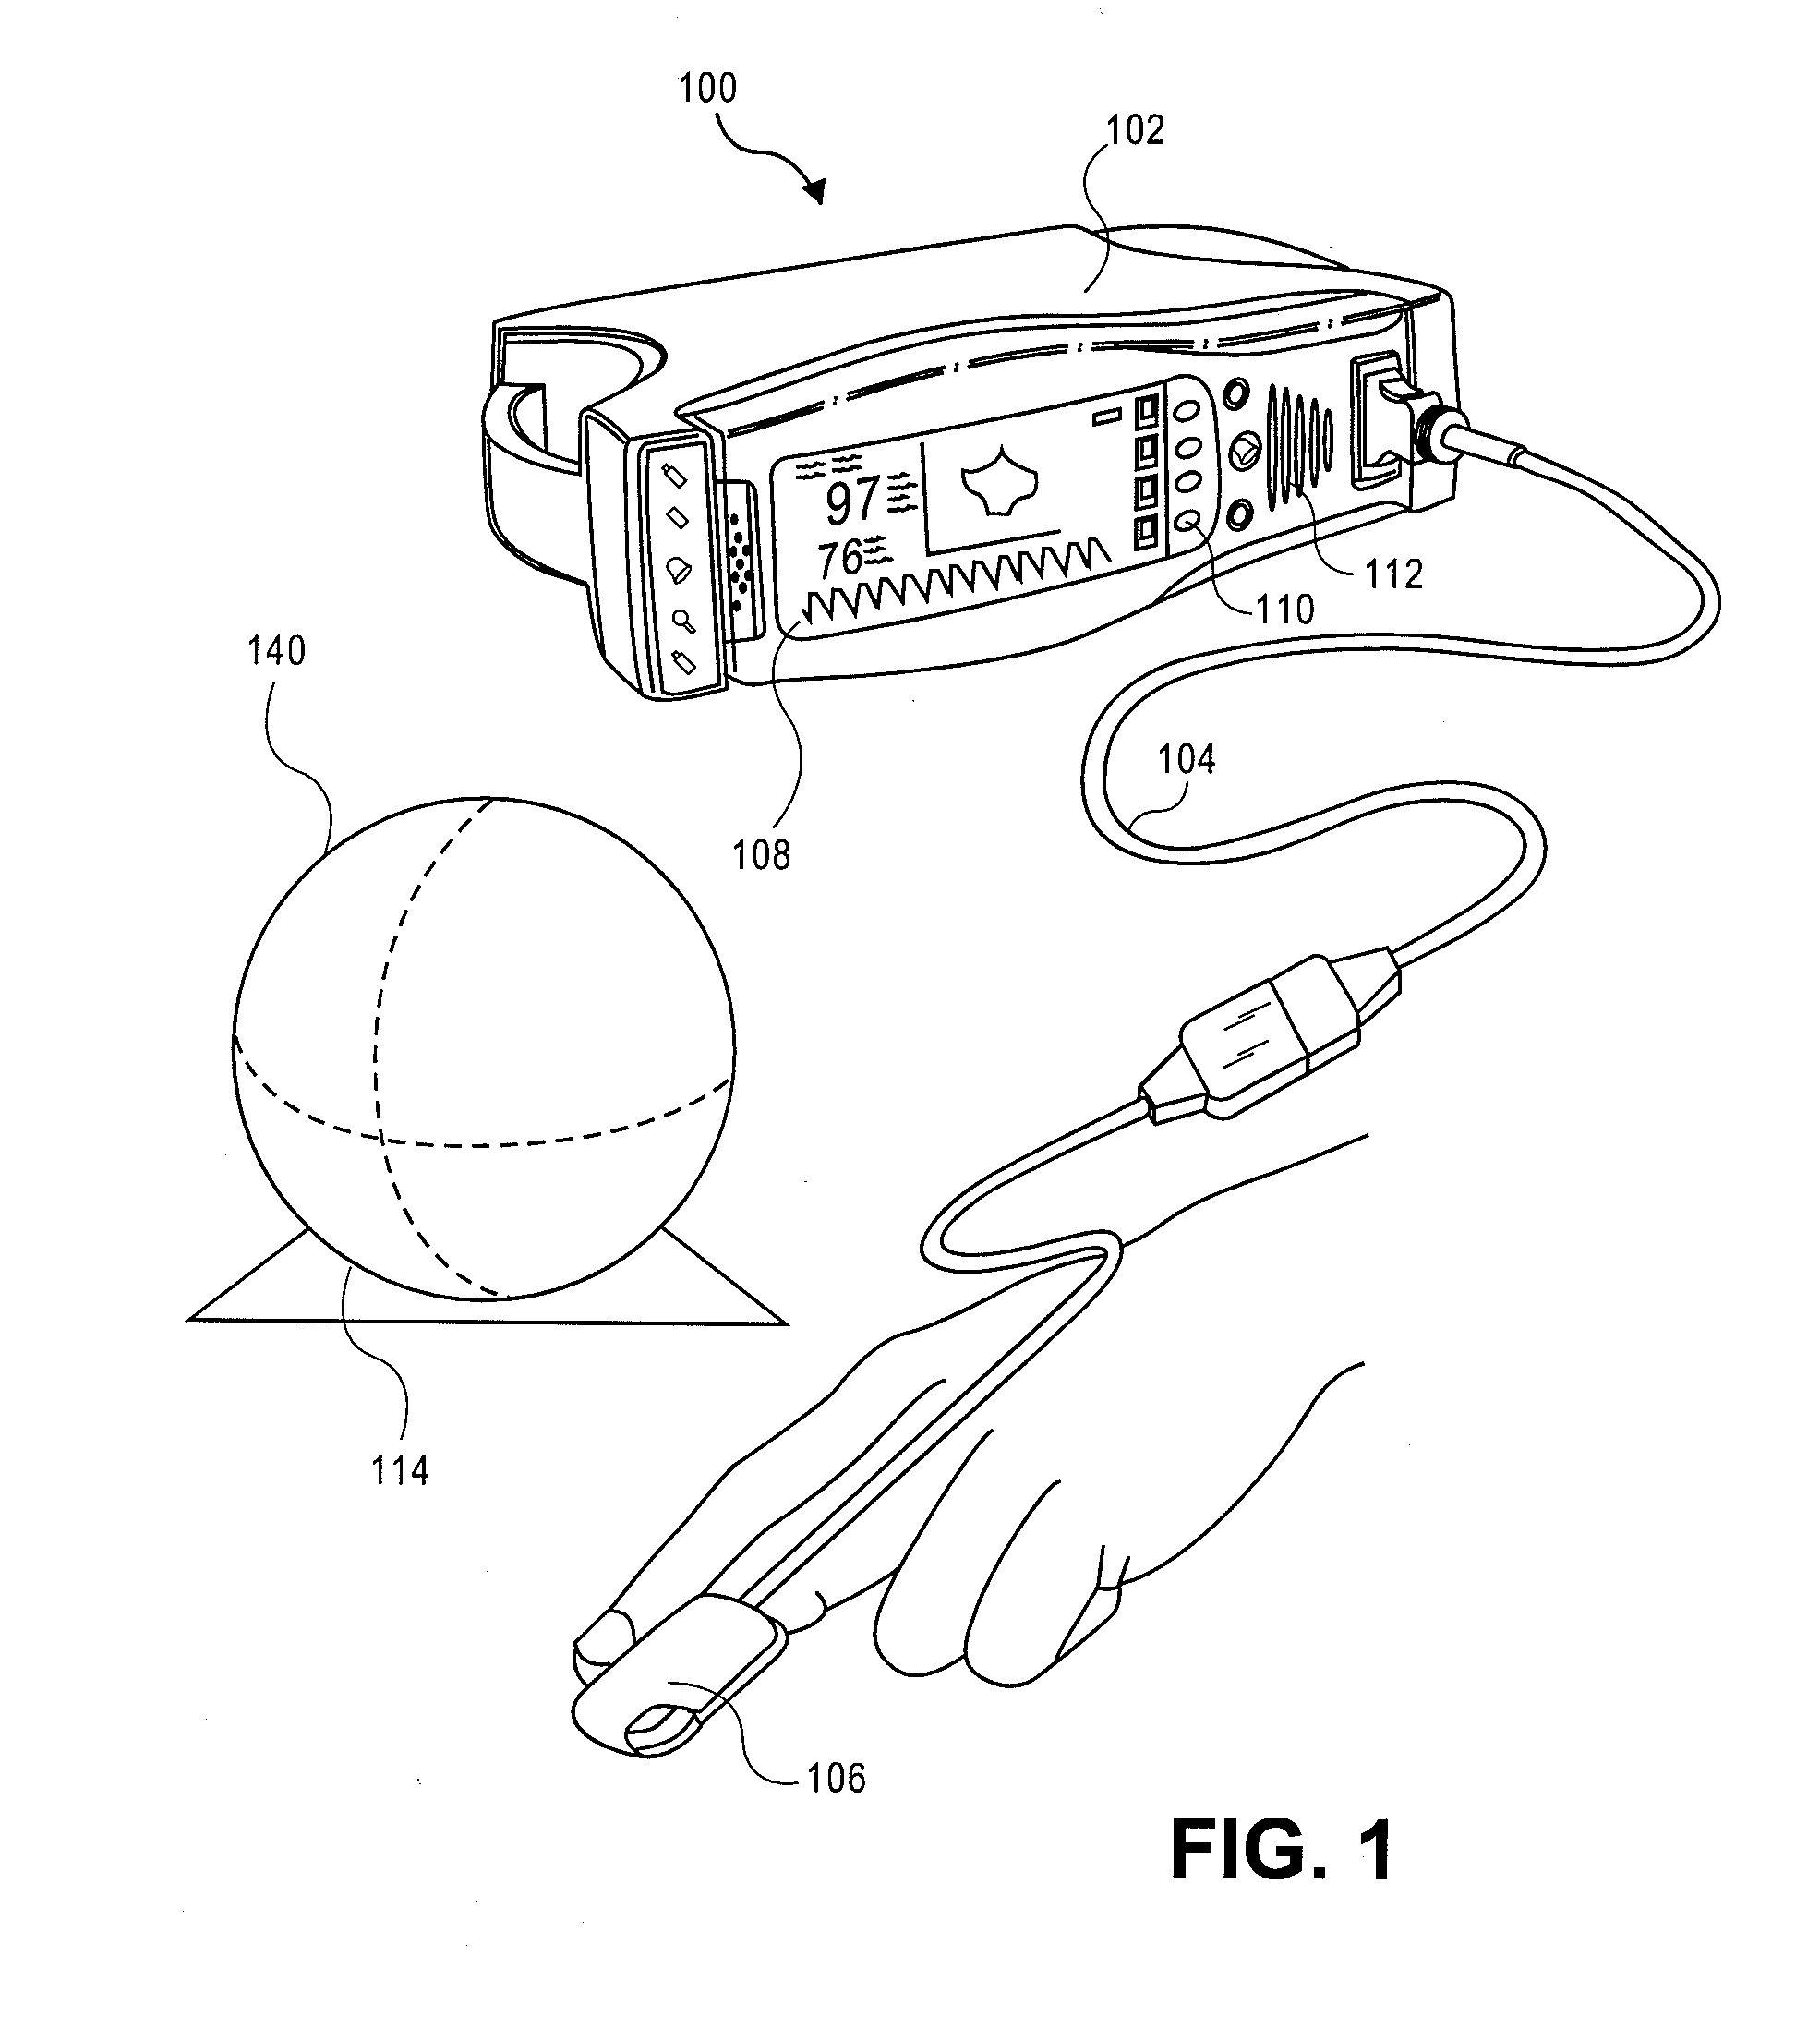 Patient monitor ambient display device